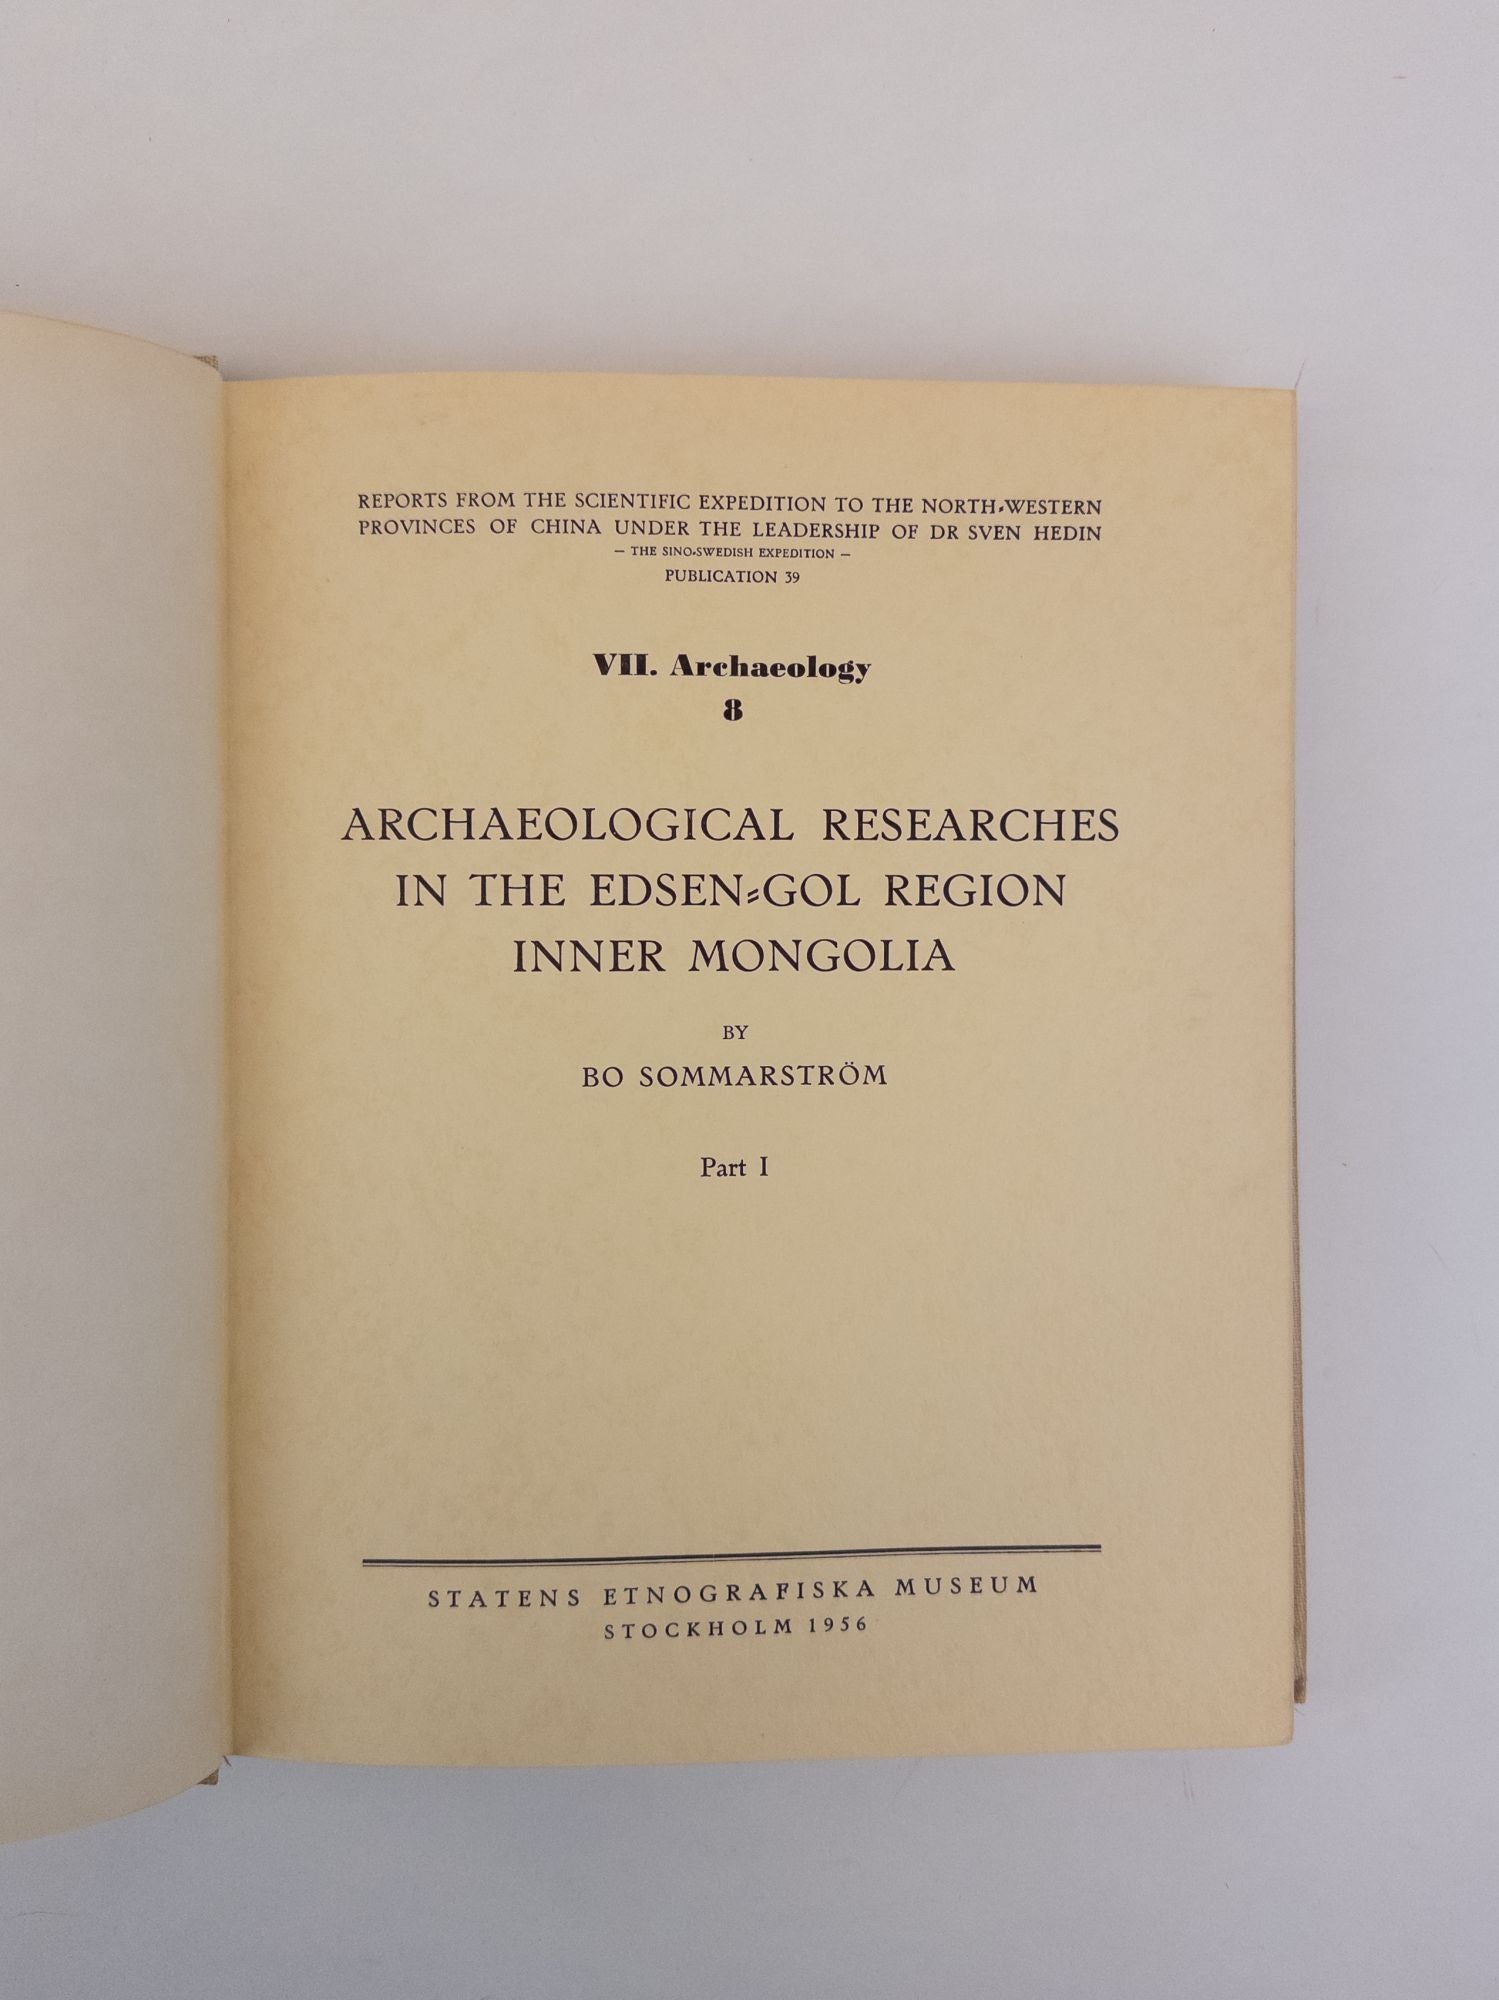 Product Image for ARCHAEOLOGICAL RESEARCHES IN THE EDSEN-GOL REGION, INNER MONGOLIA [Two Volumes]